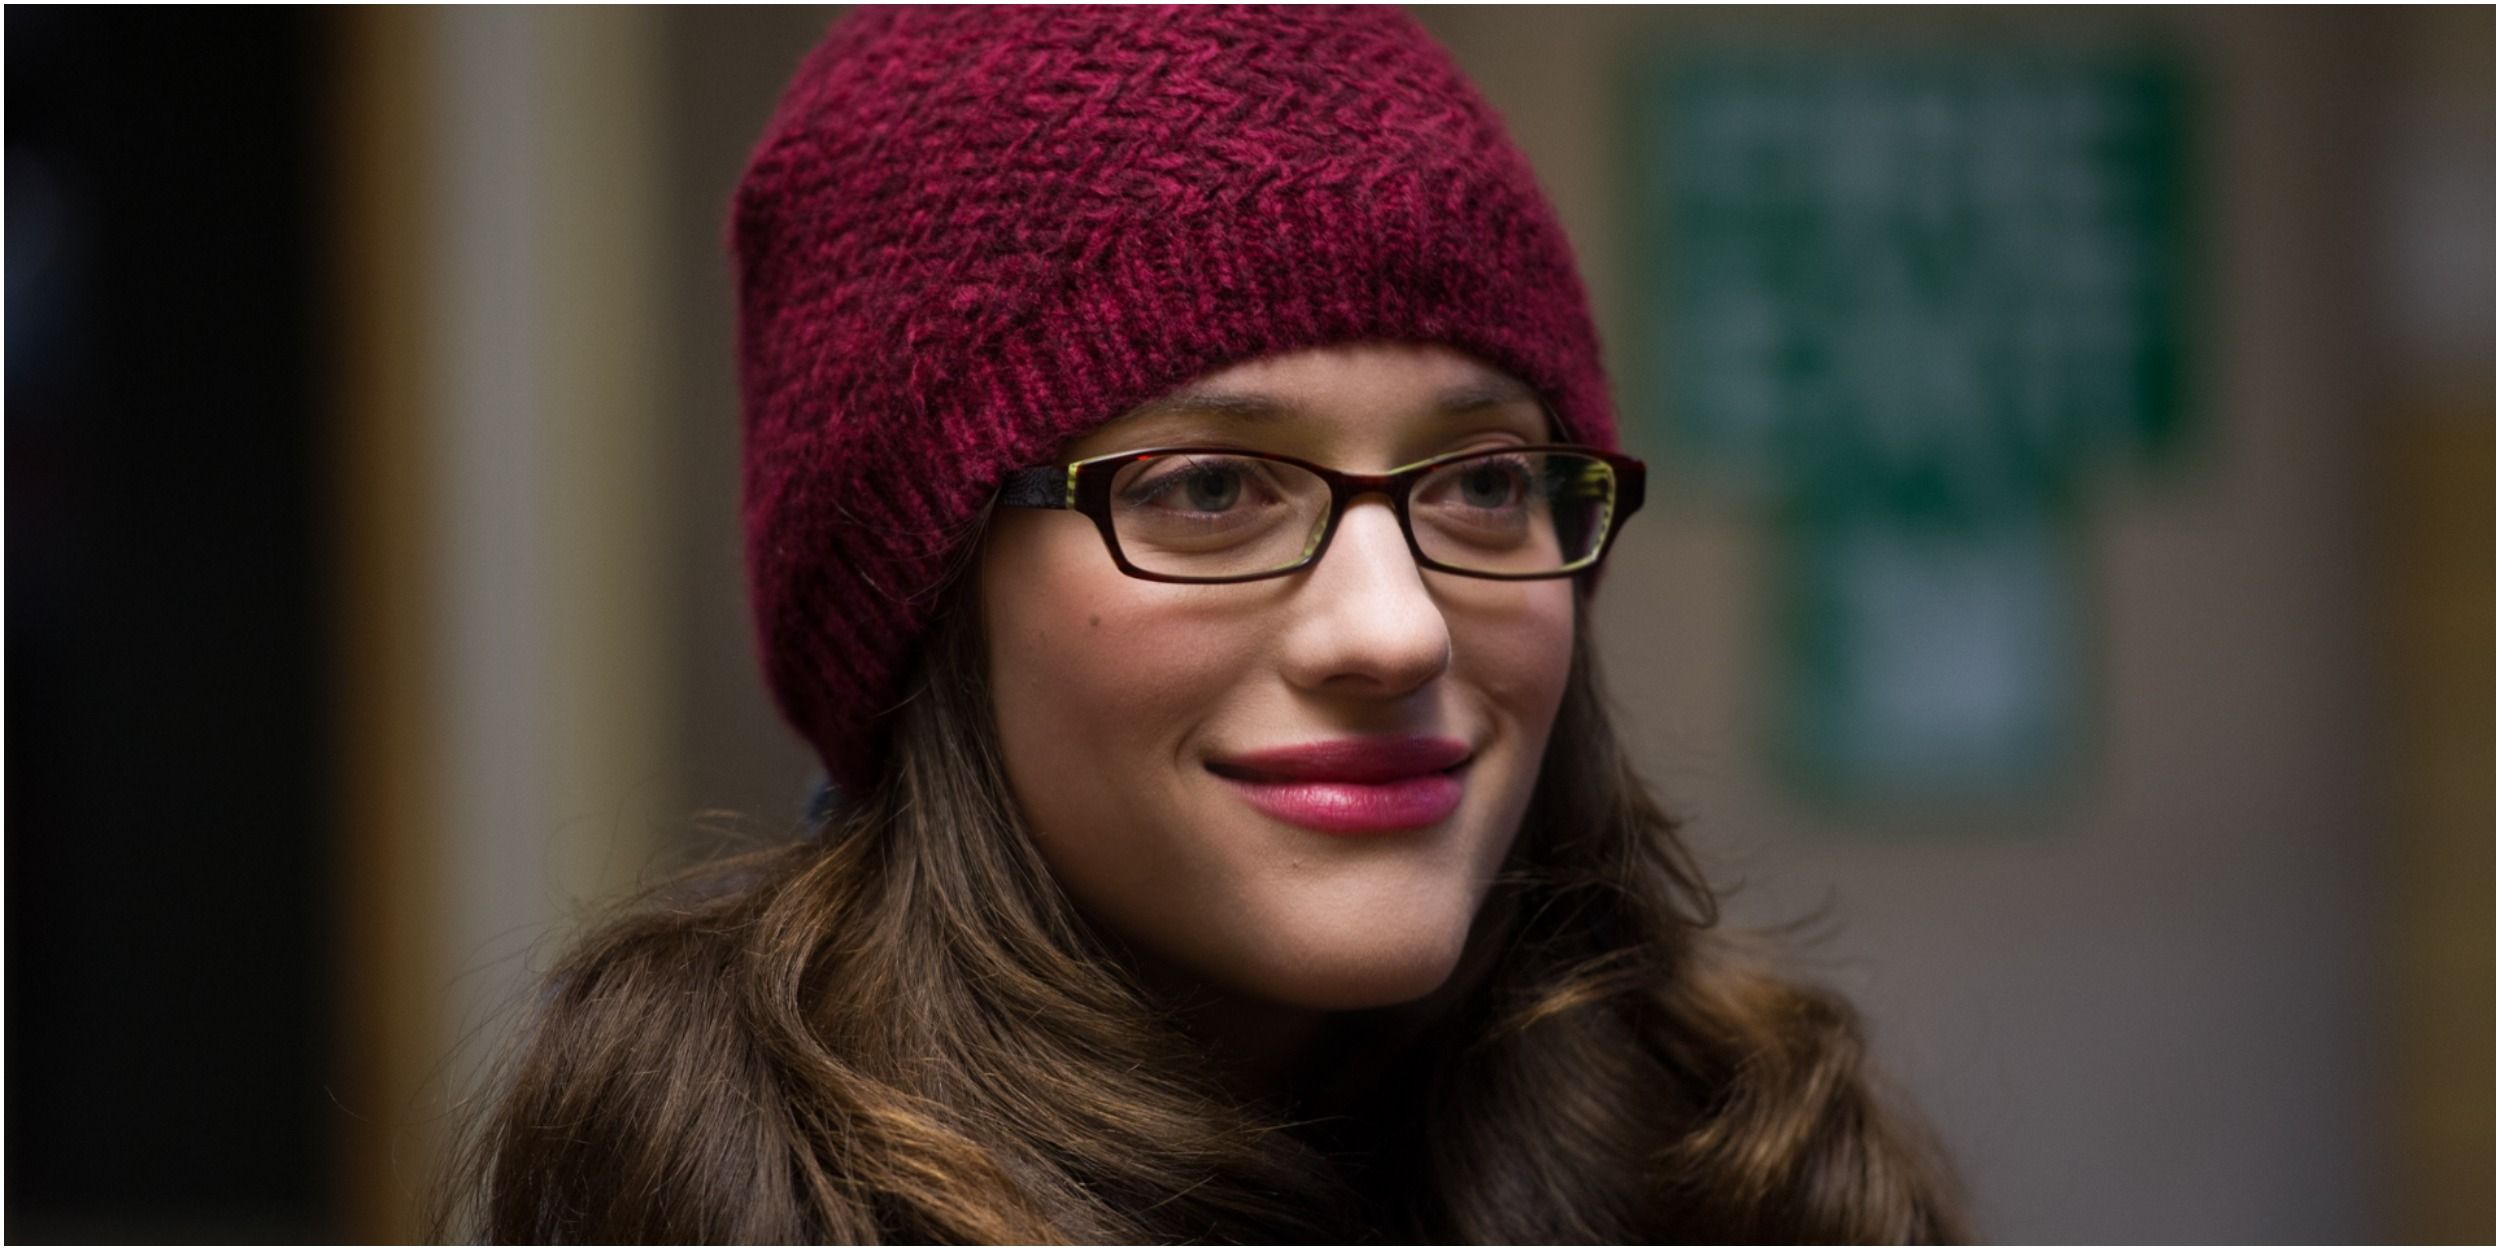 Darcy Lewis in a red hat, smiling, in Thor.